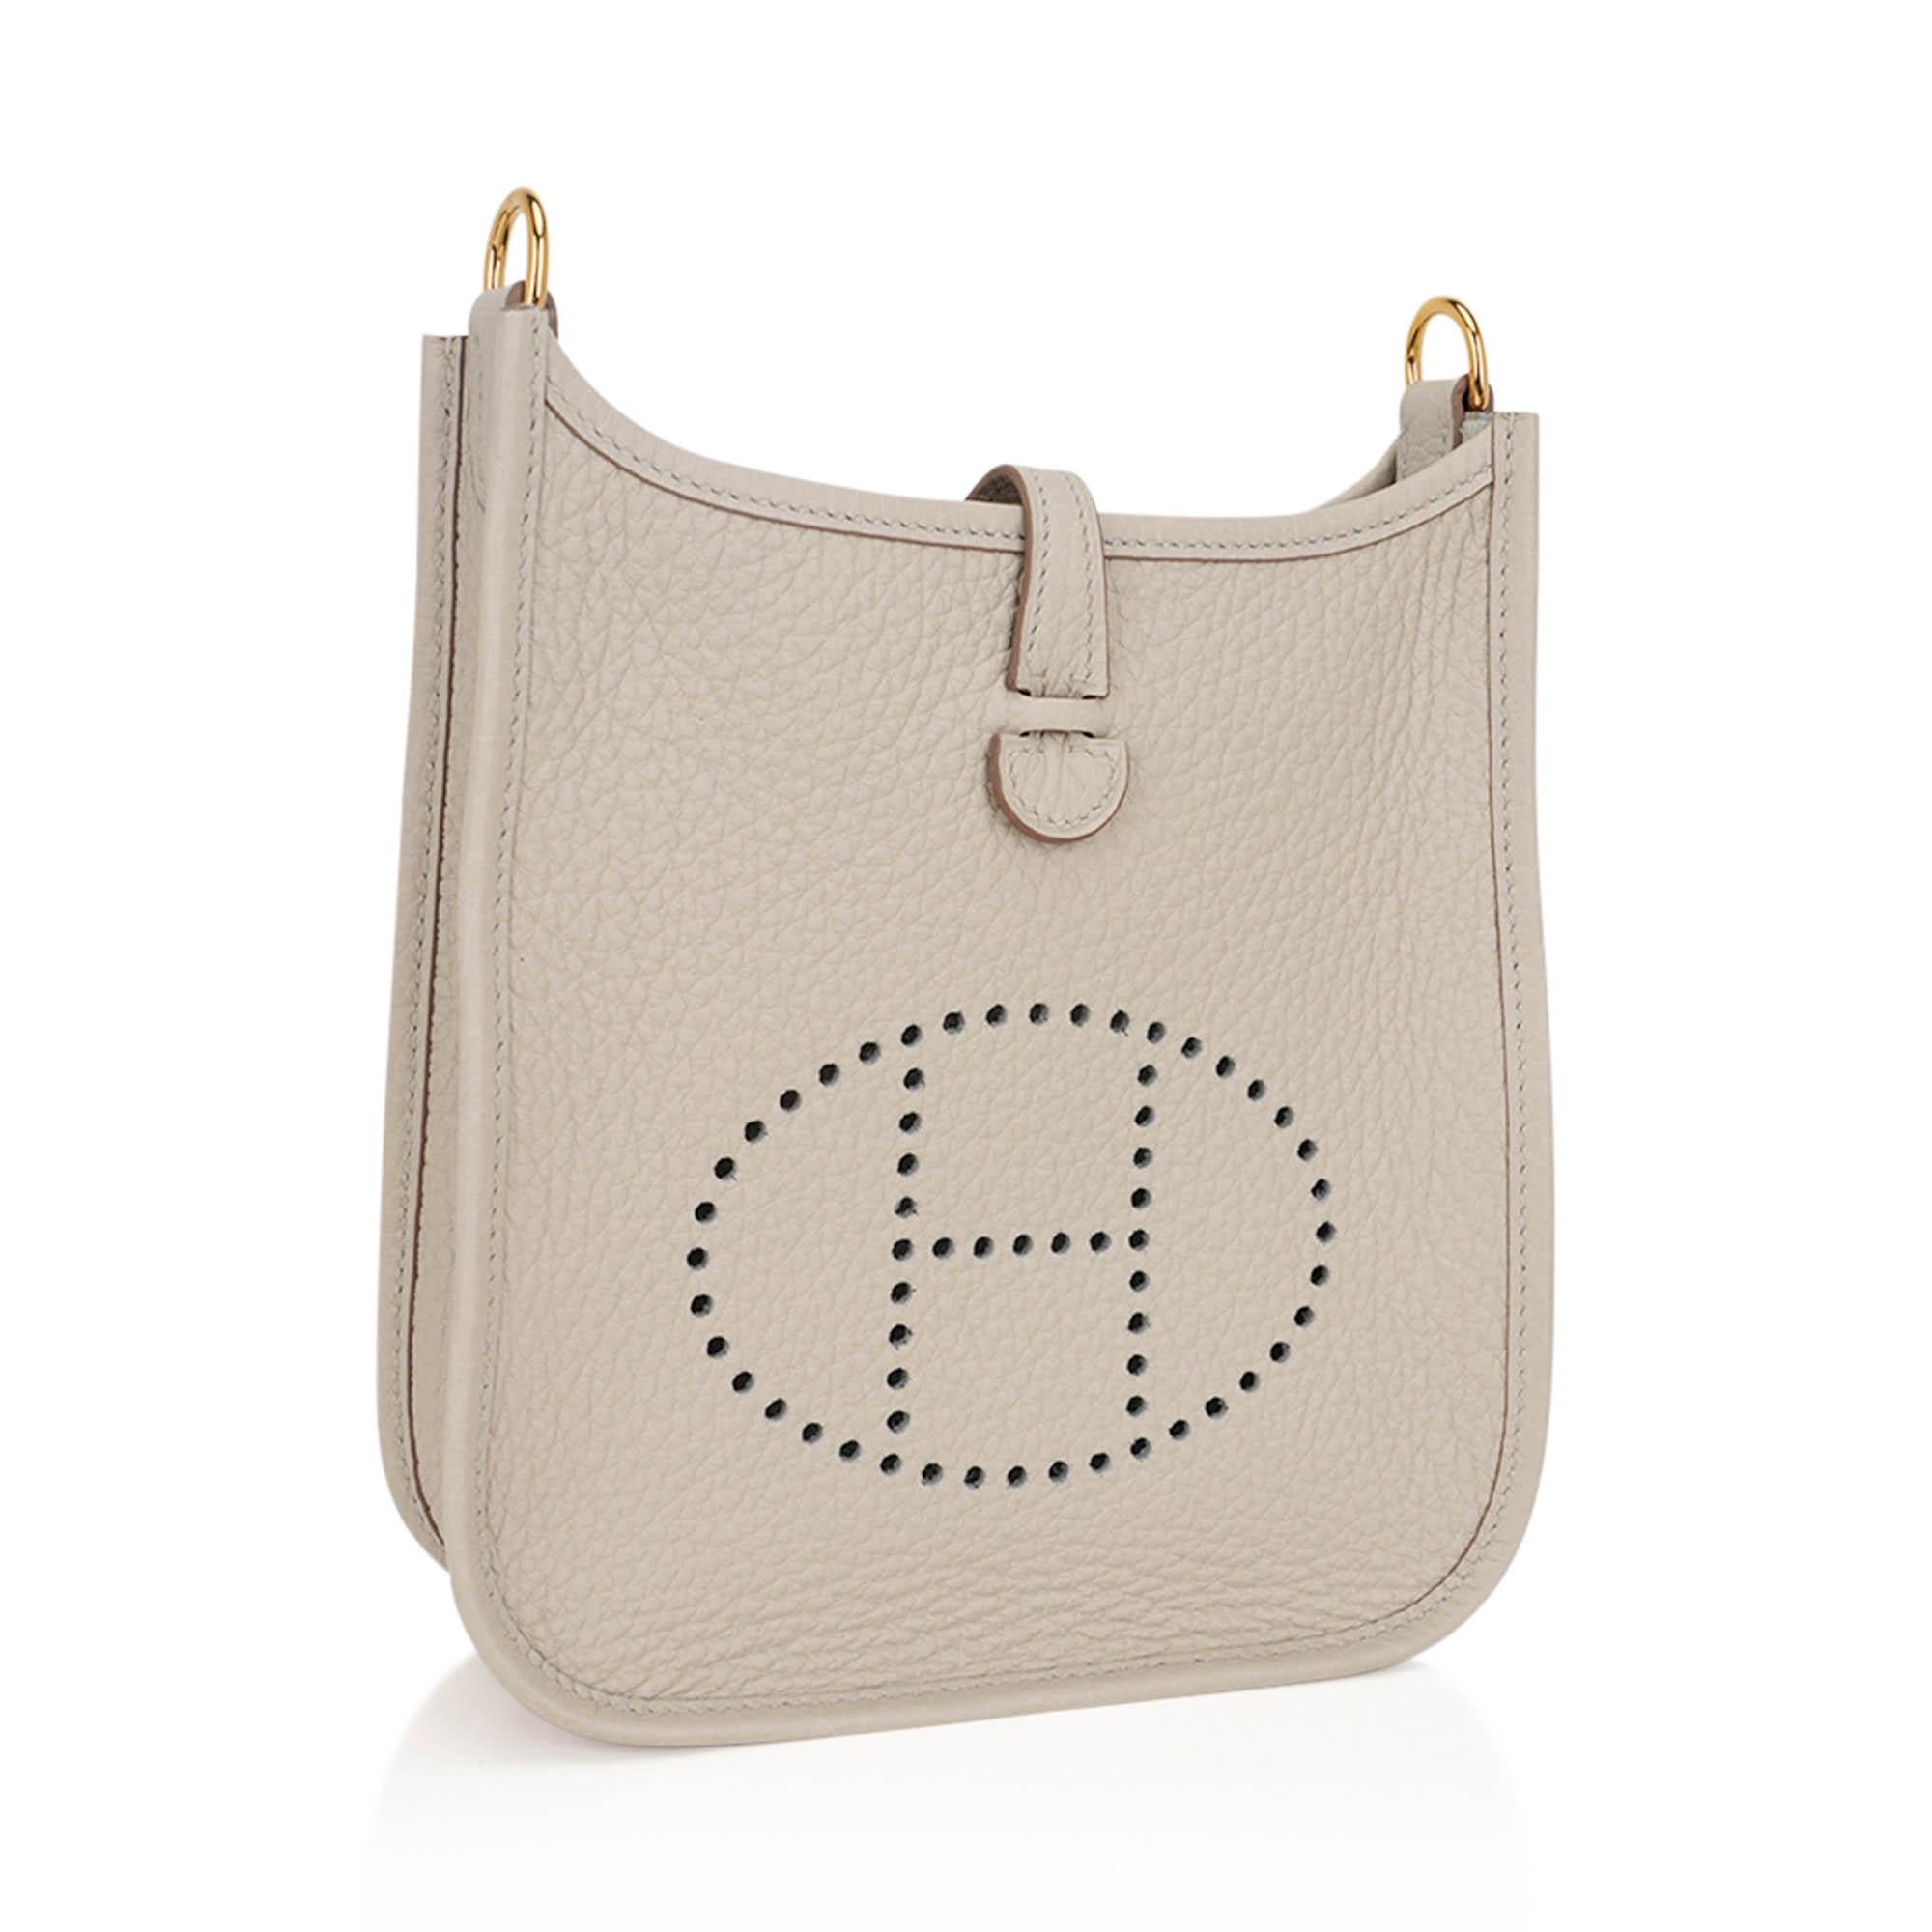 Mightychic offers an Hermes Evelyne TPM featured in neutral Beton (Concrete).
This prefect colour is the go to bag.
Clemence leather is soft and scratch resistant.
Signature perforated H on front of bag.
Pops with Gold hardware.
Fabulous shoulder or